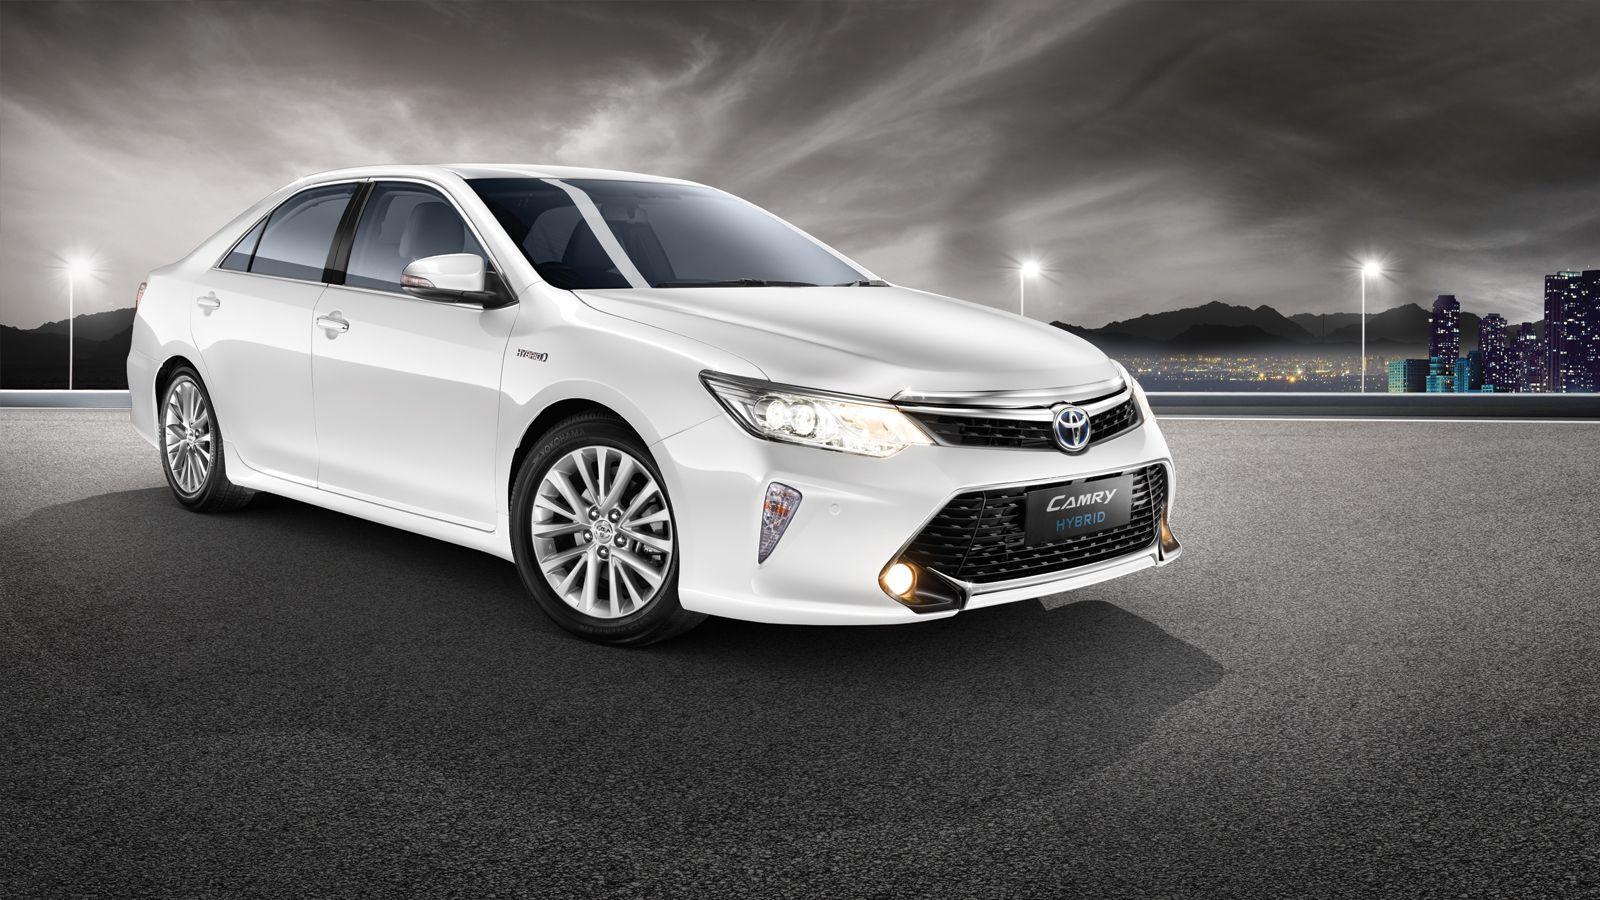 Toyota Camry Wallpapers - Wallpaper Cave